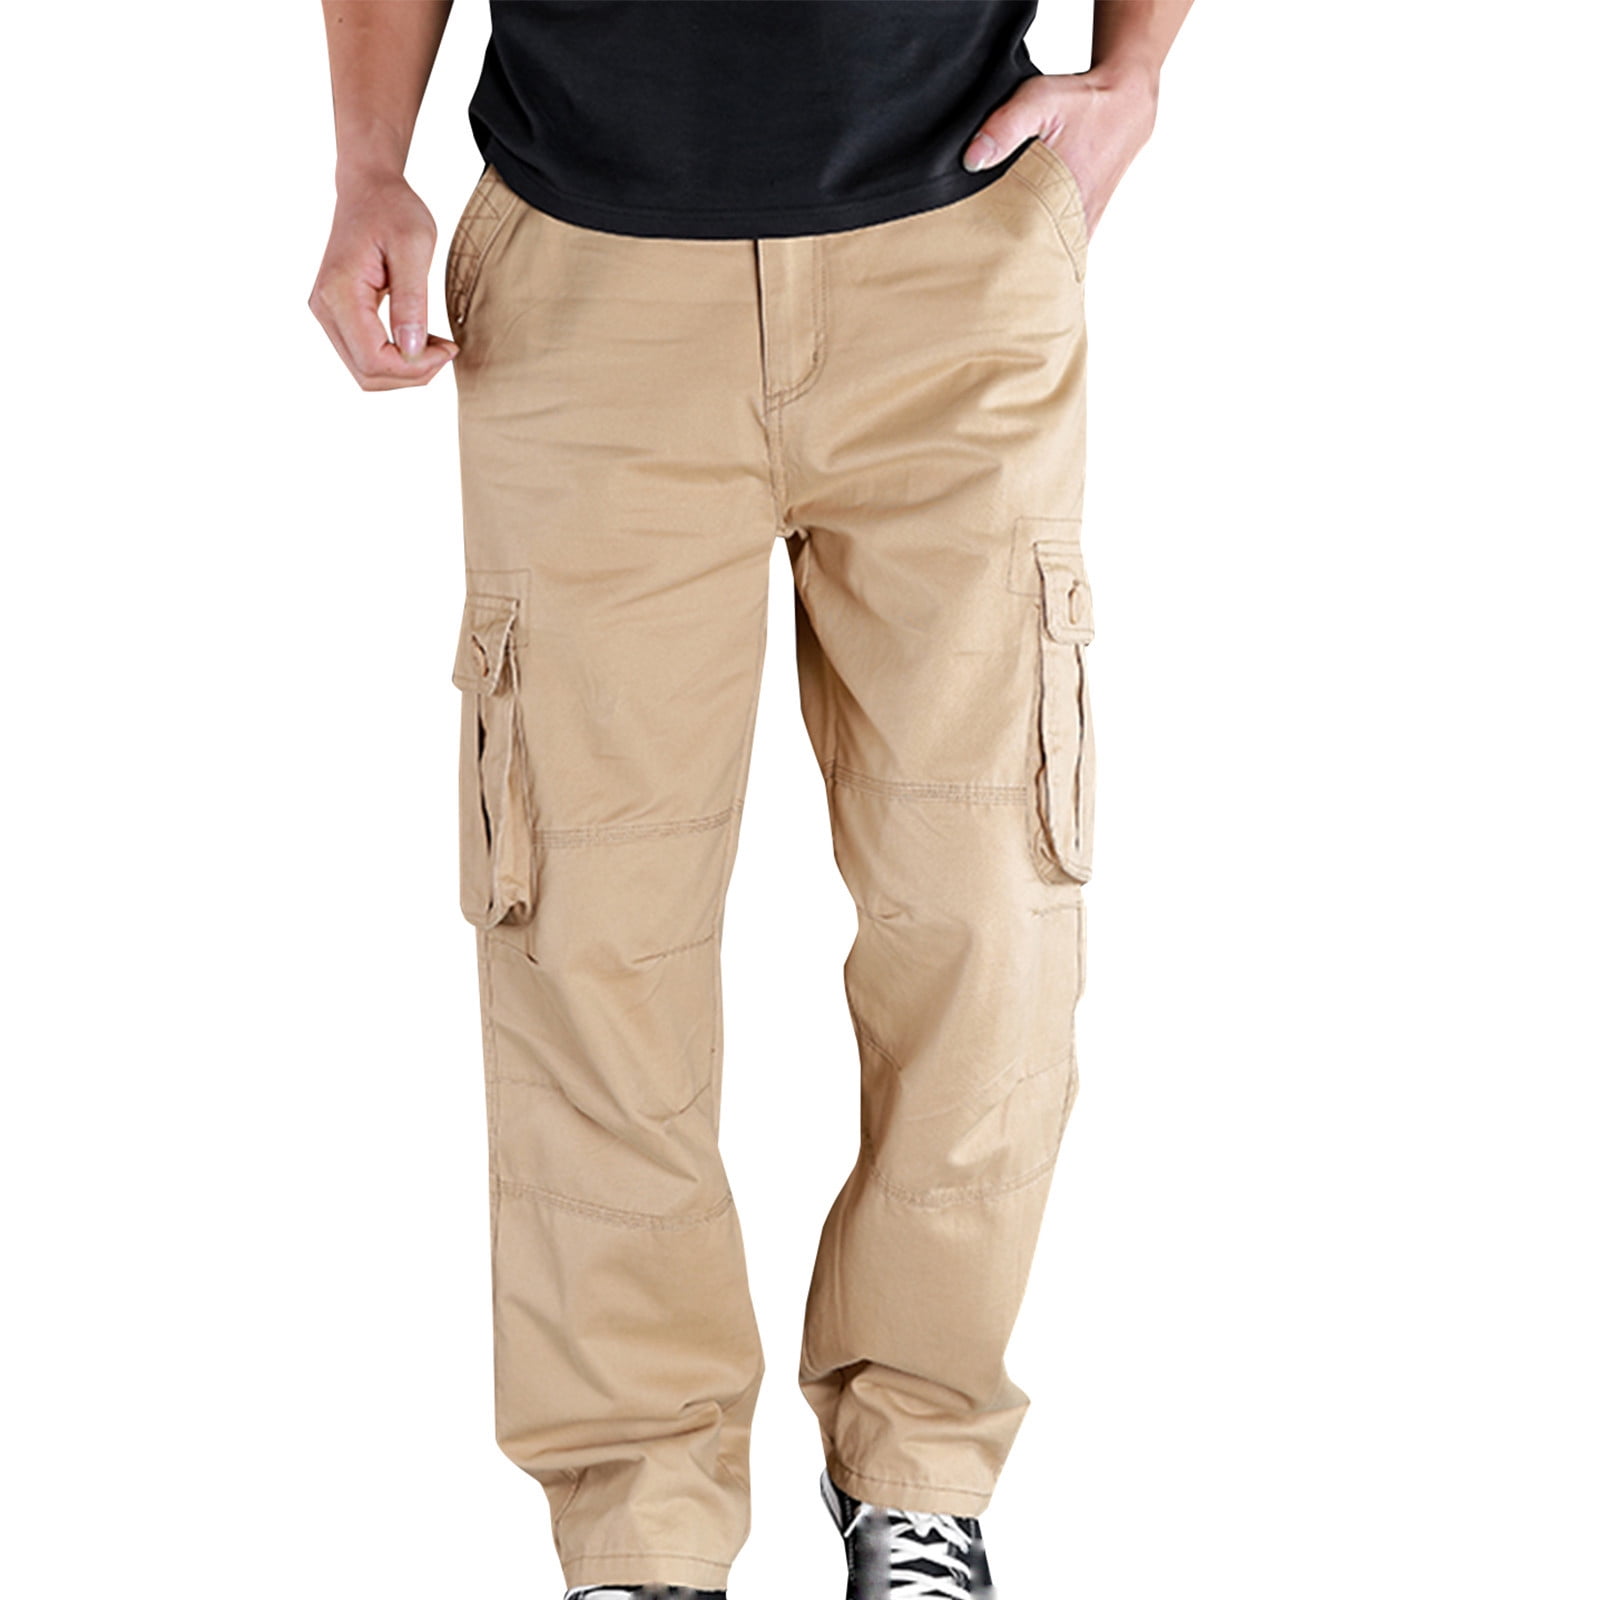 YYDGH On Clearance Plus Size Cargo Pants for Men Solid Casual